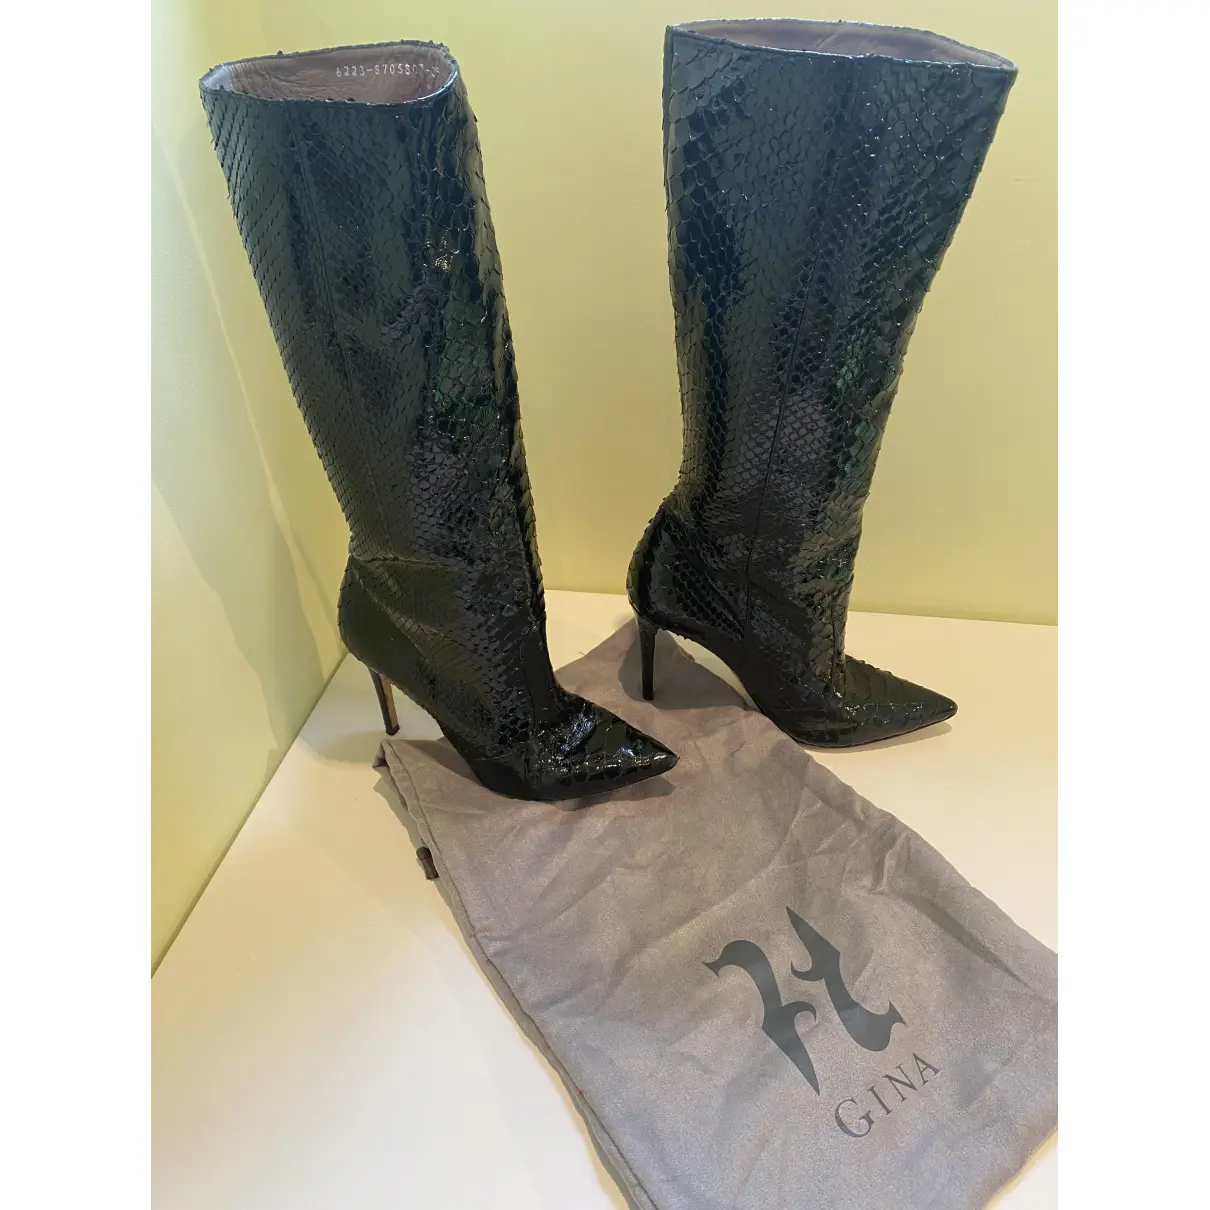 Buy Gina Boots online